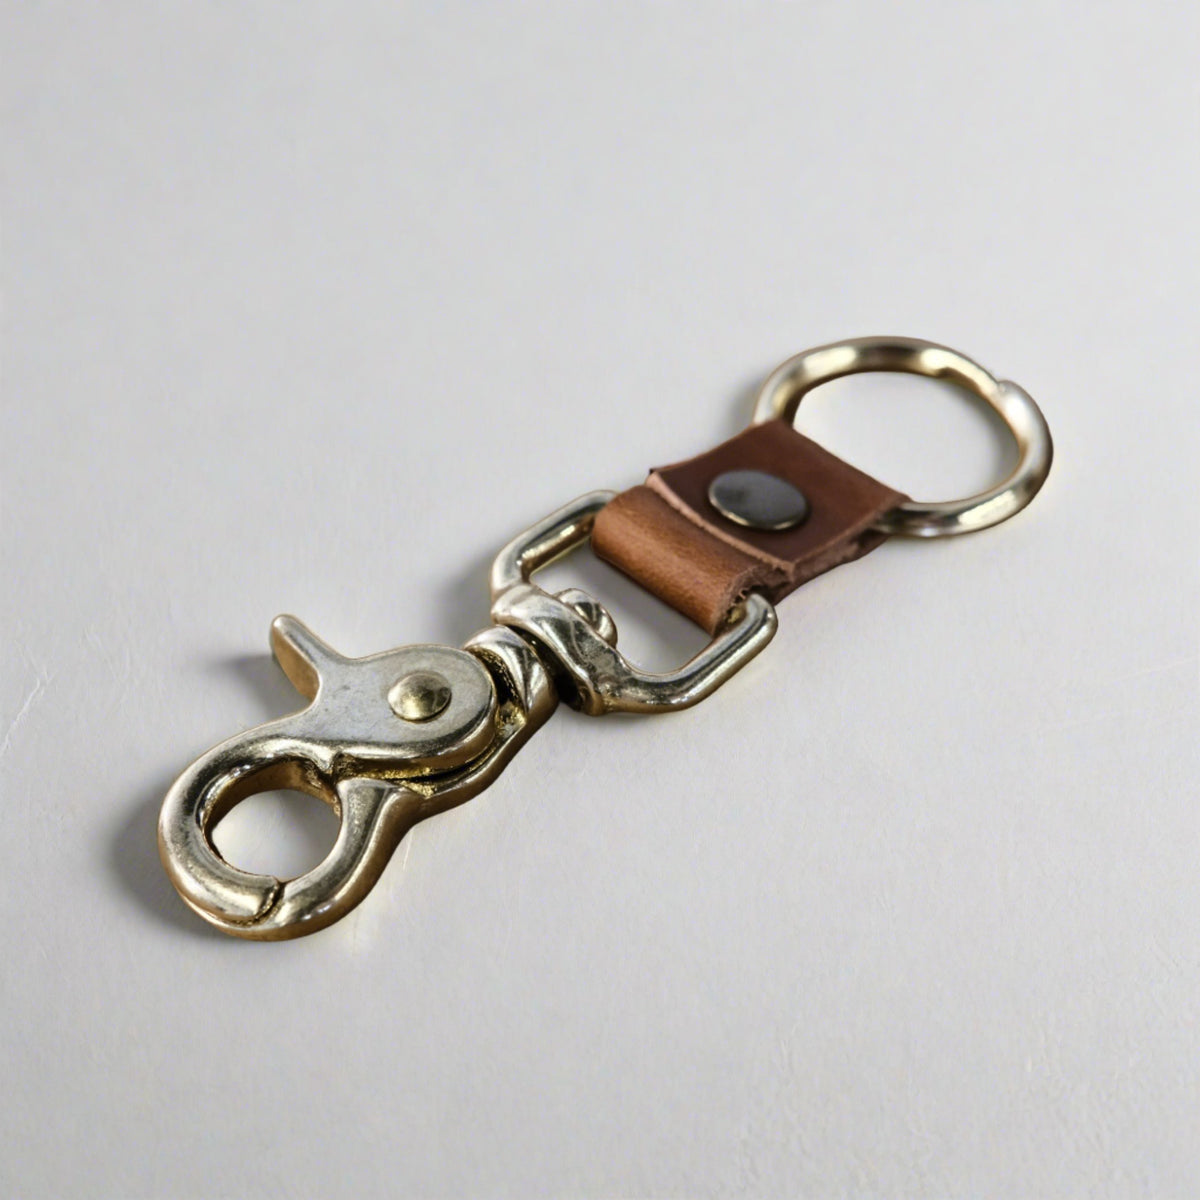 Leather and Brass Keychain Curtis Rempel Handcrafted Curt + Myr Co. Mennonite Store, La Crete, Alberta, Canada